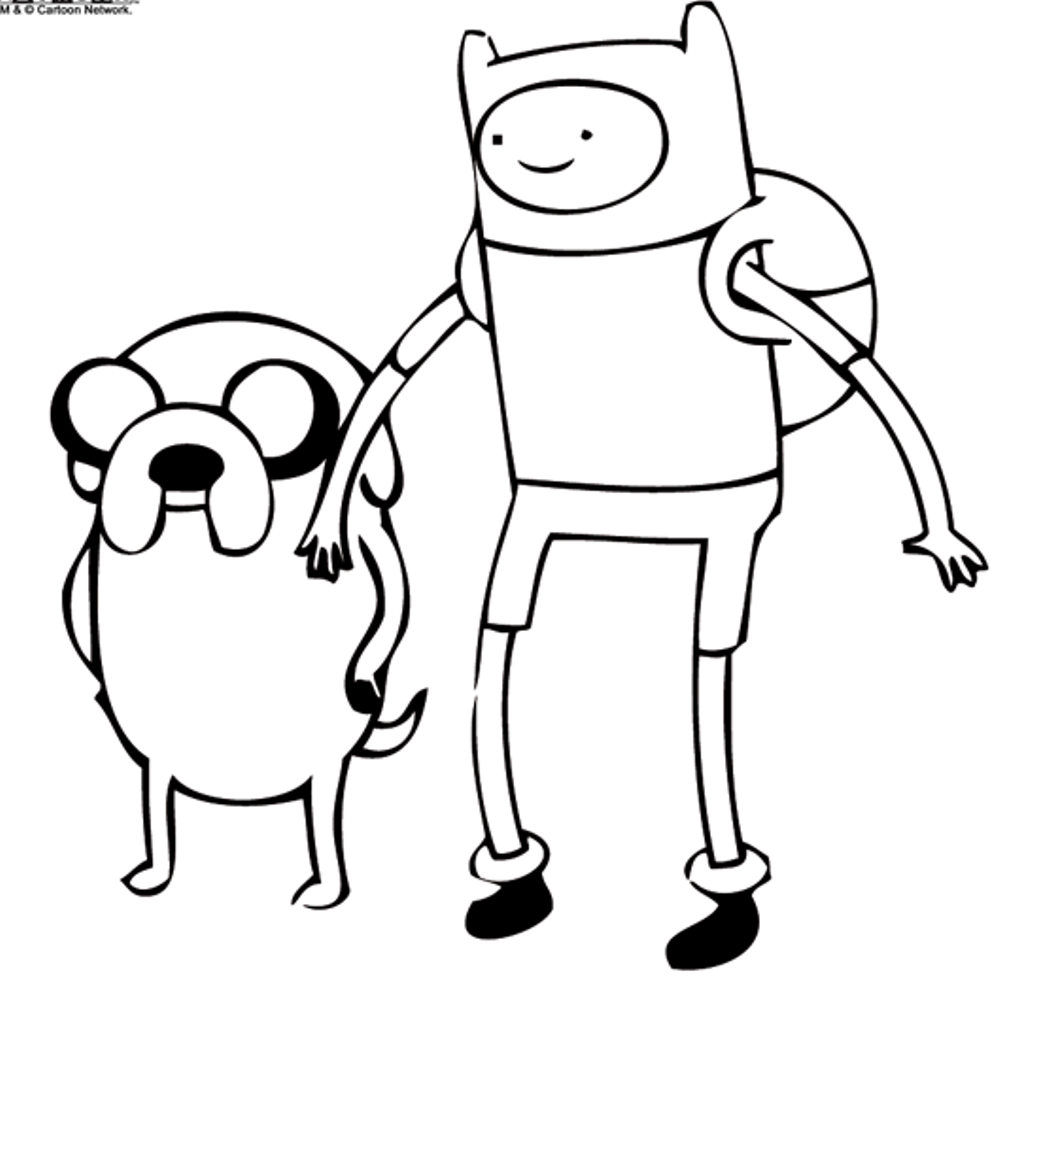 Cartoon Adventure Time Coloring Pages | Cartoon Coloring pages of ...